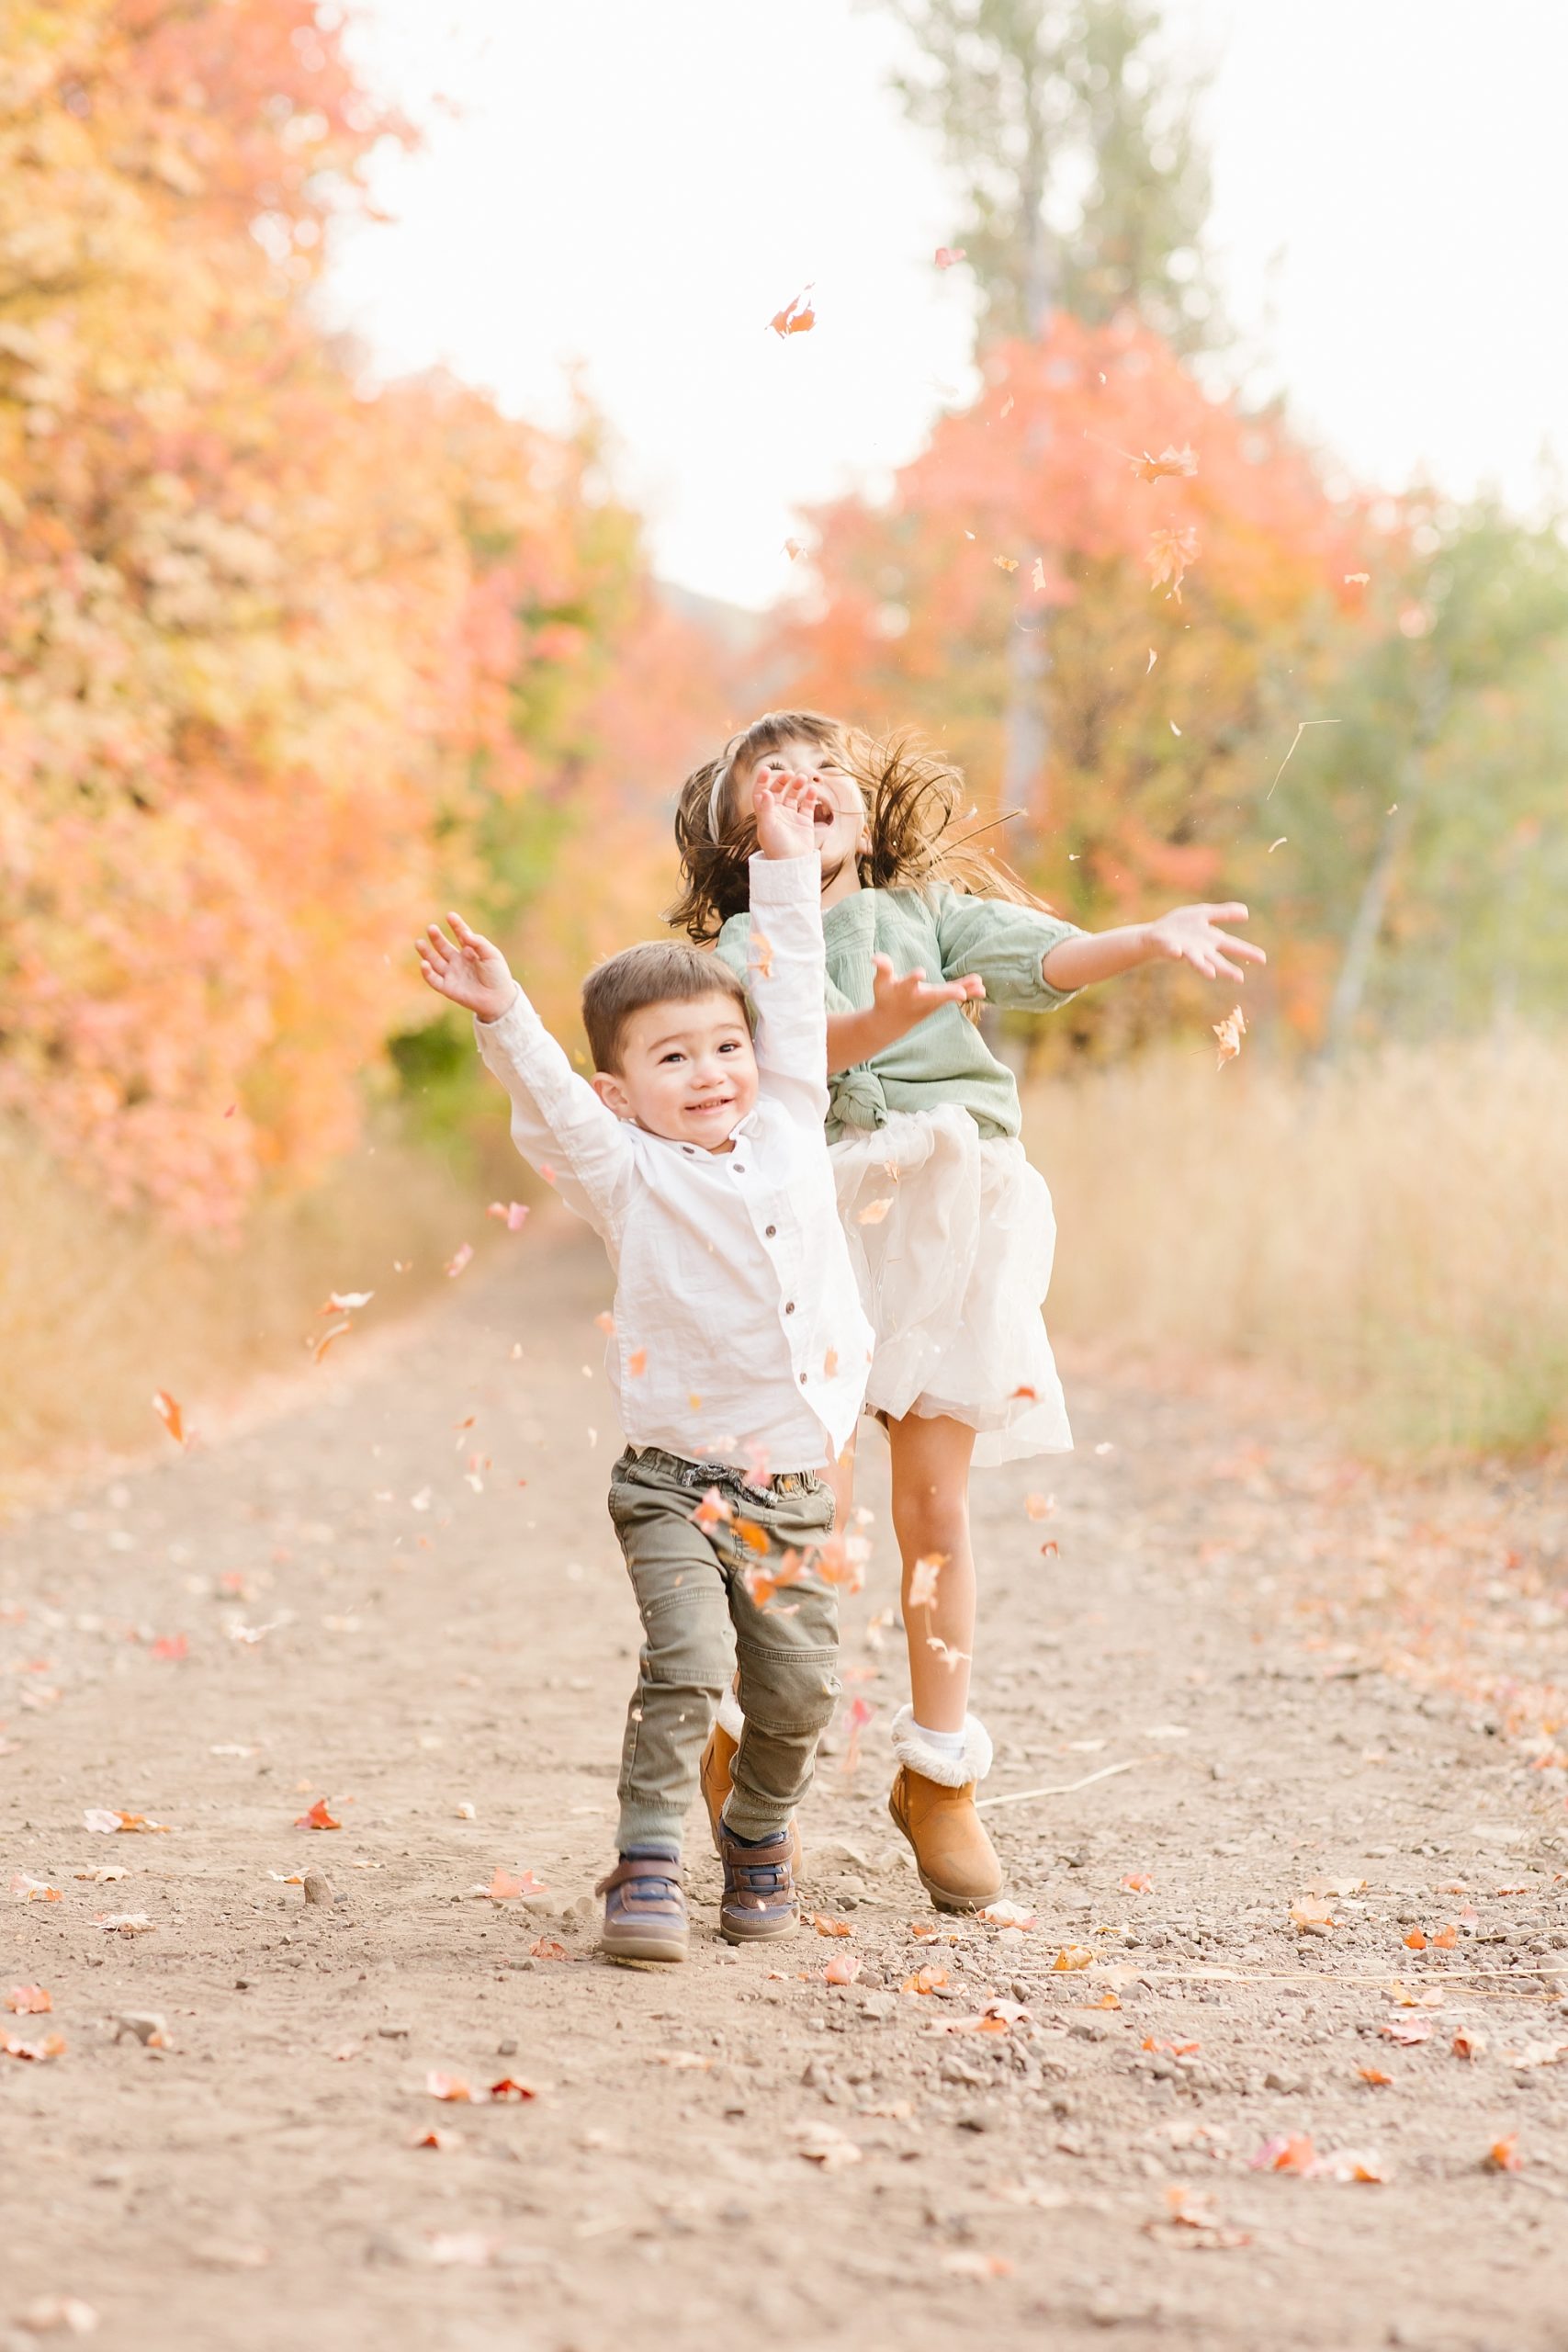 Kids playing in the fall leaves is the perfect way to end your family portrait session!!